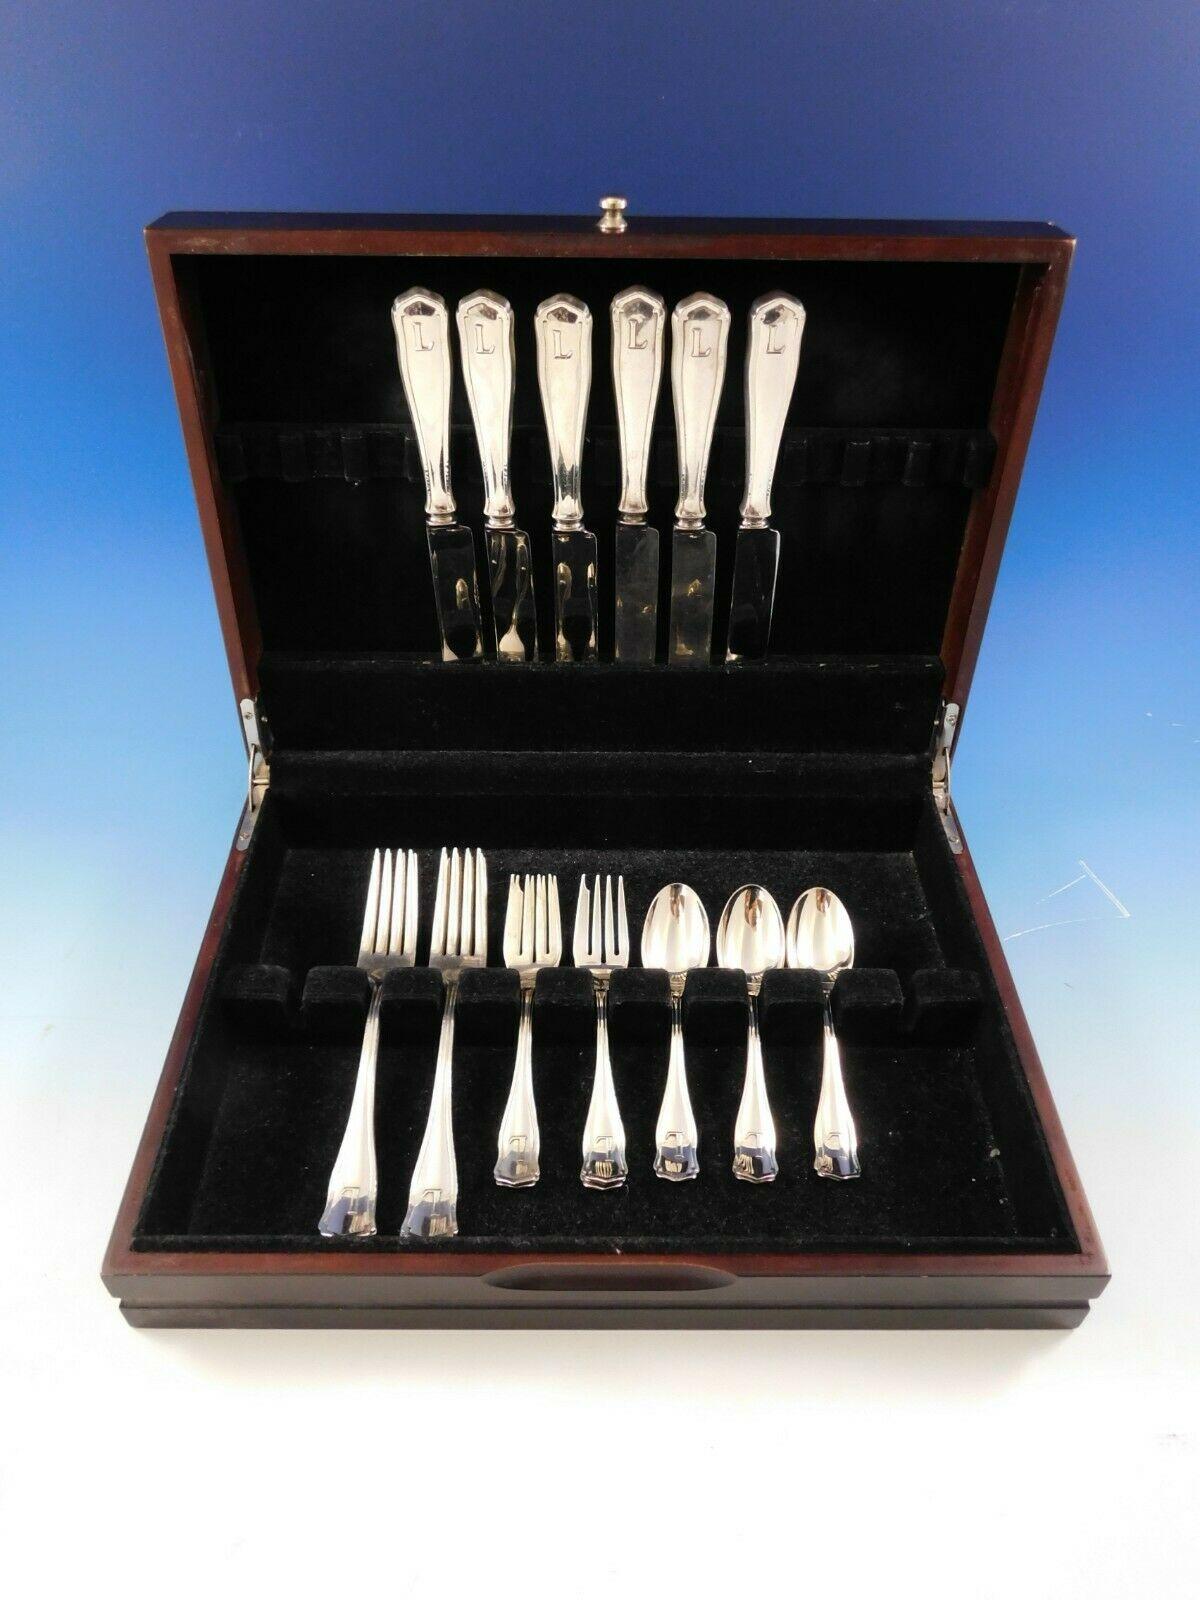 Dolores by Shreve sterling silver dinner size flatware set of 24 pieces. Great starter set! This Arts & Crafts pattern was introduced in the year 1909 and features a unique raised border. This set includes:

6 dinner size knives, blunt, 9 1/2